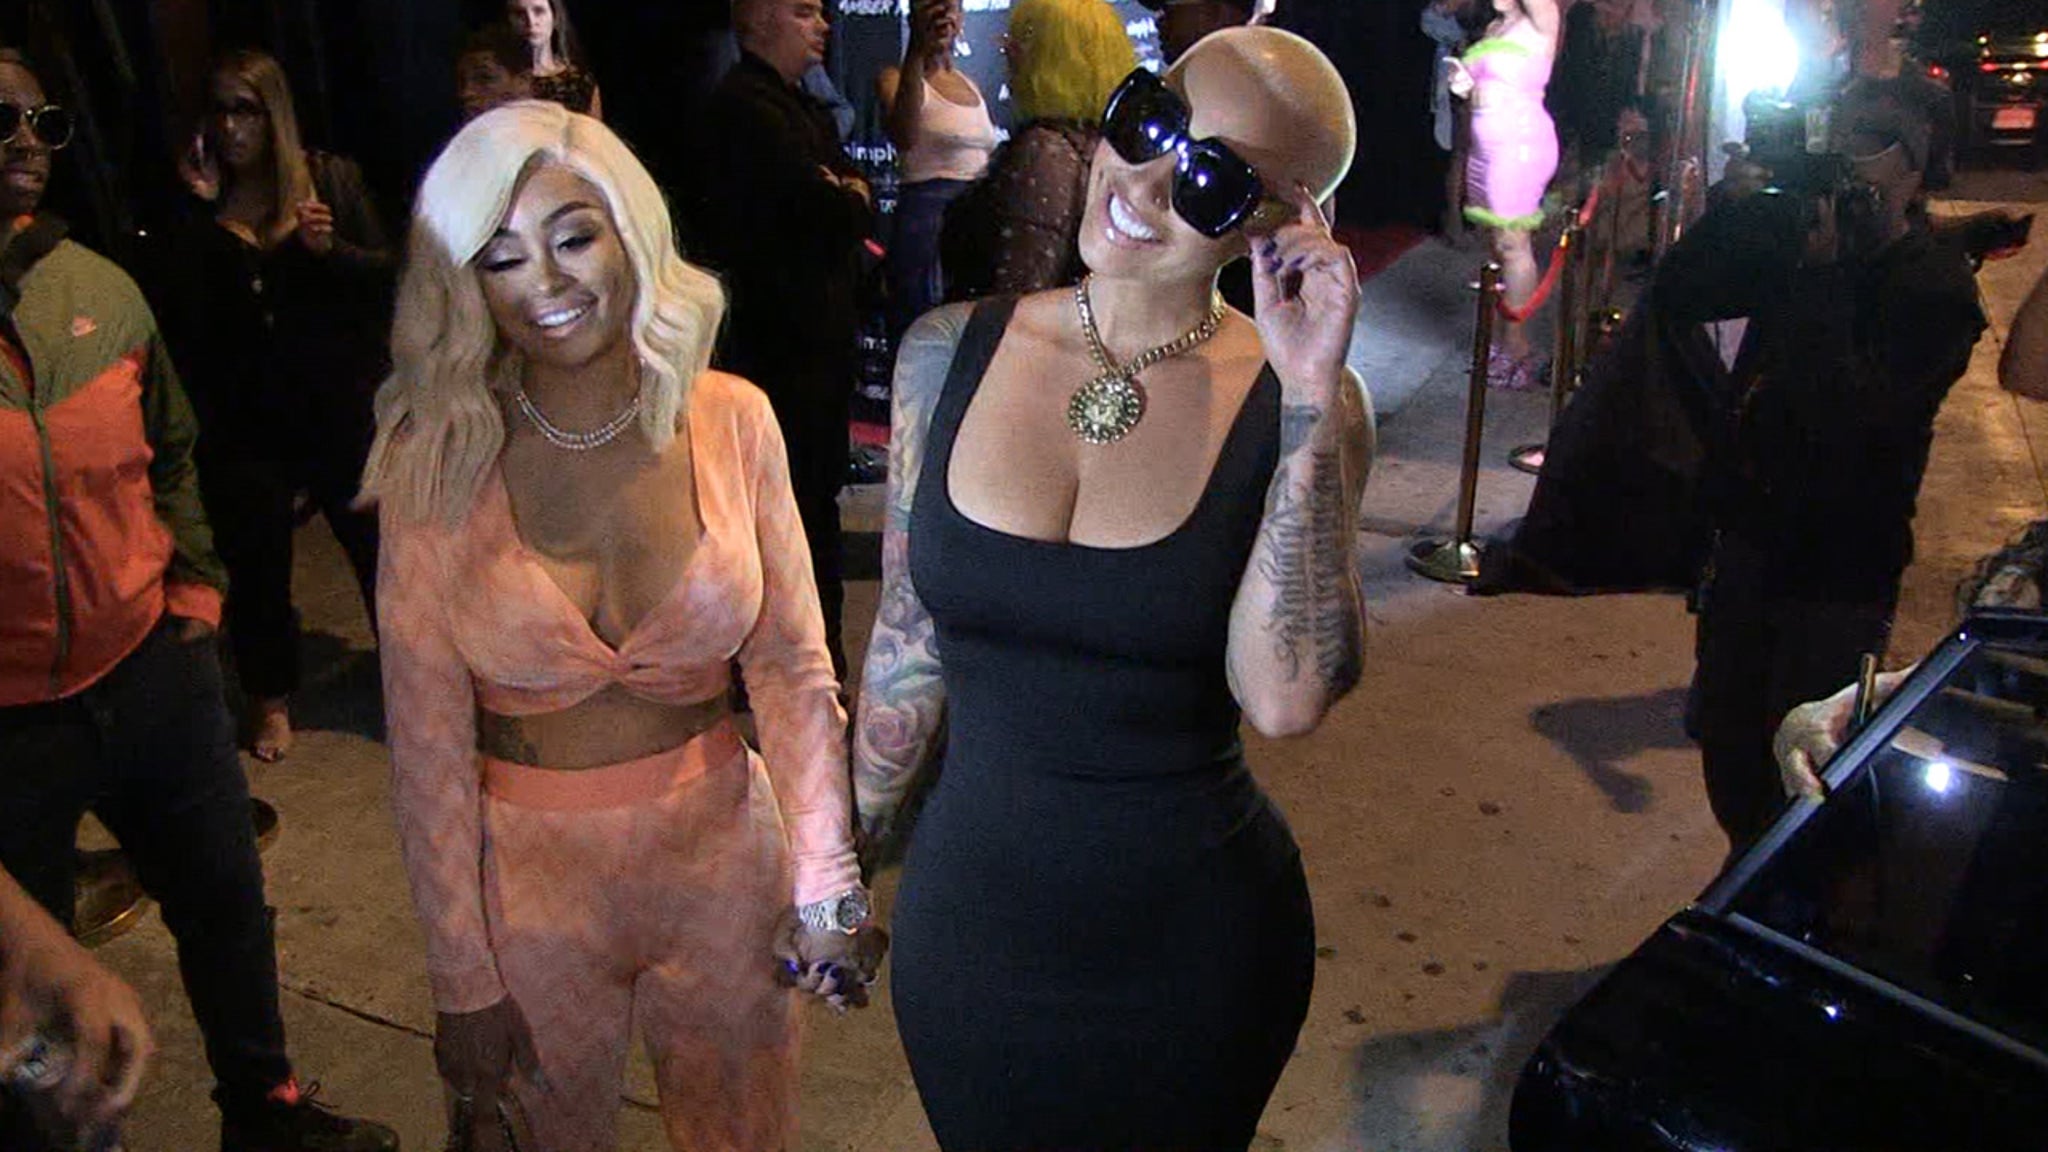 Amber Rose, Blac Chyna, and 21 Savage is seen at the Day n Night Festival  in Anaheim, California.